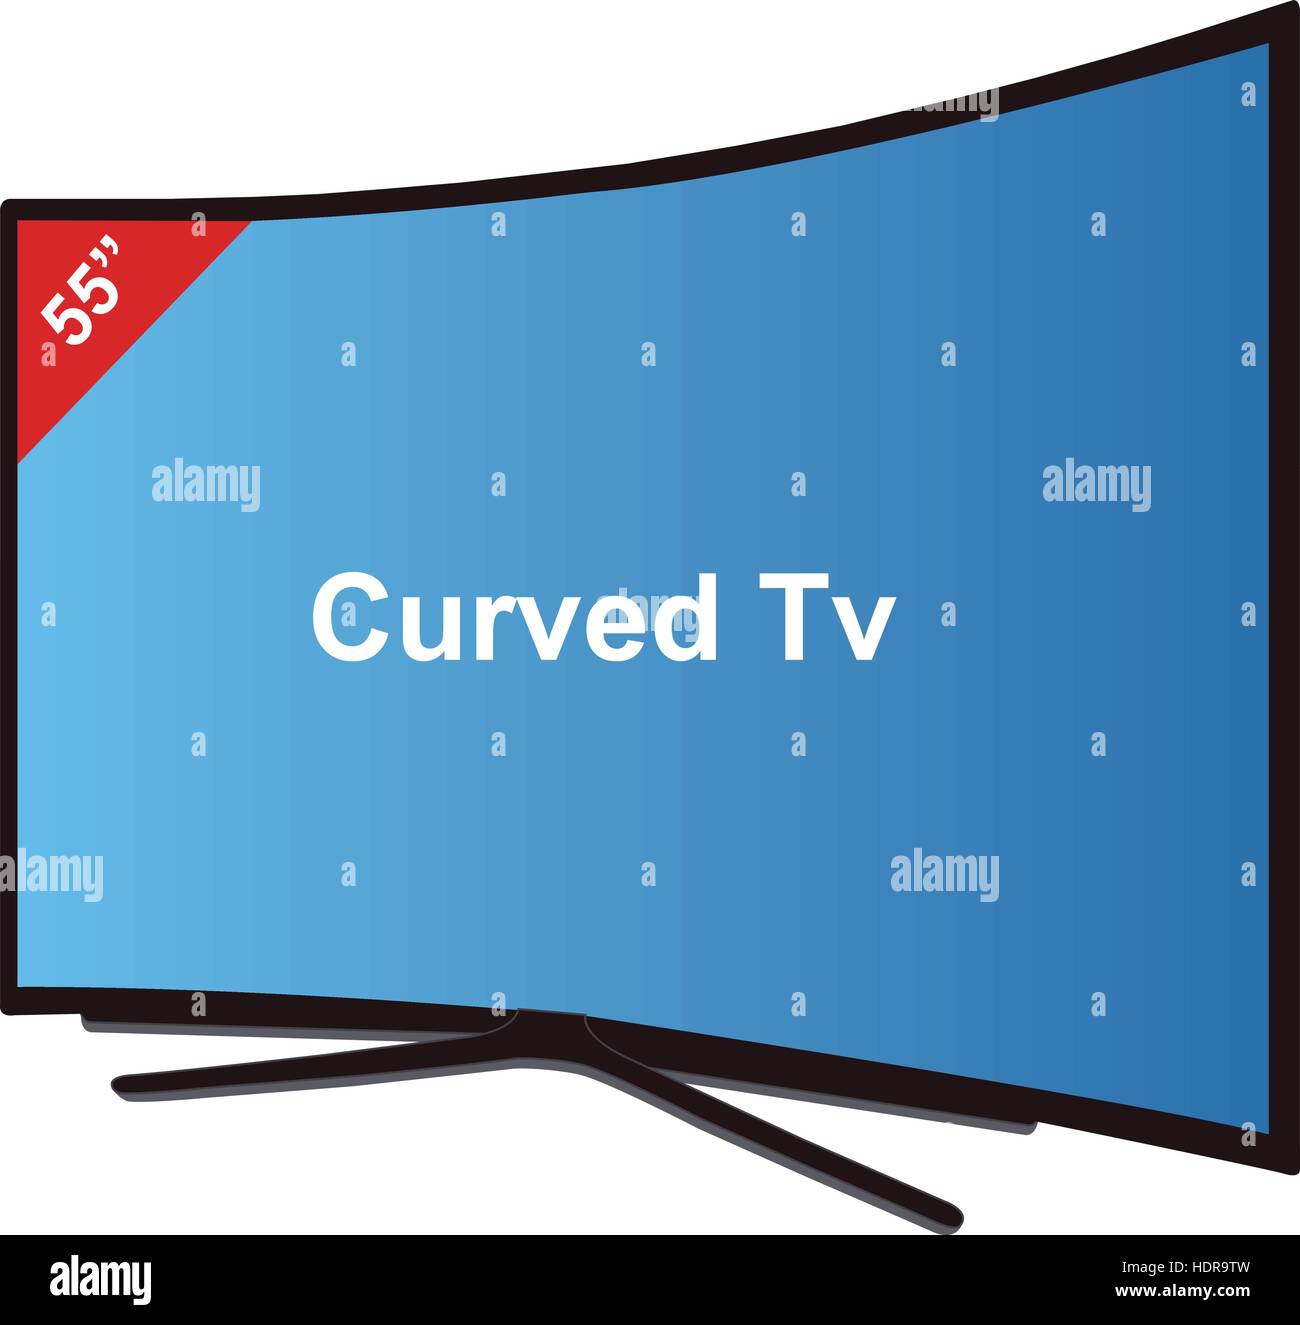 Smart Tv Curved-55 Inches Stock Vector